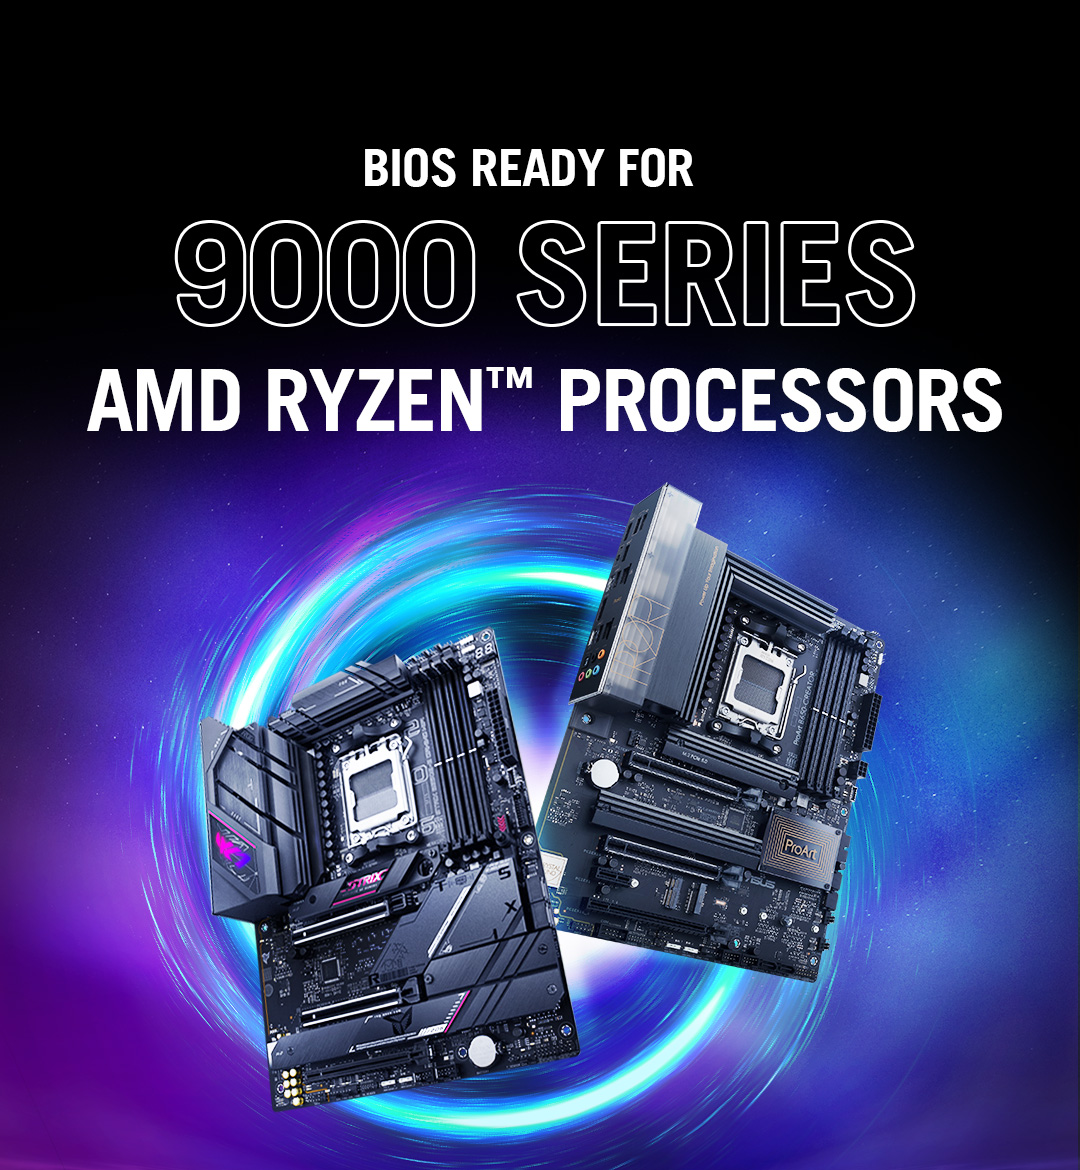 Two B650 motherboards image with BIOS Ready for 9000 Series AMD Ryzen™ Processors